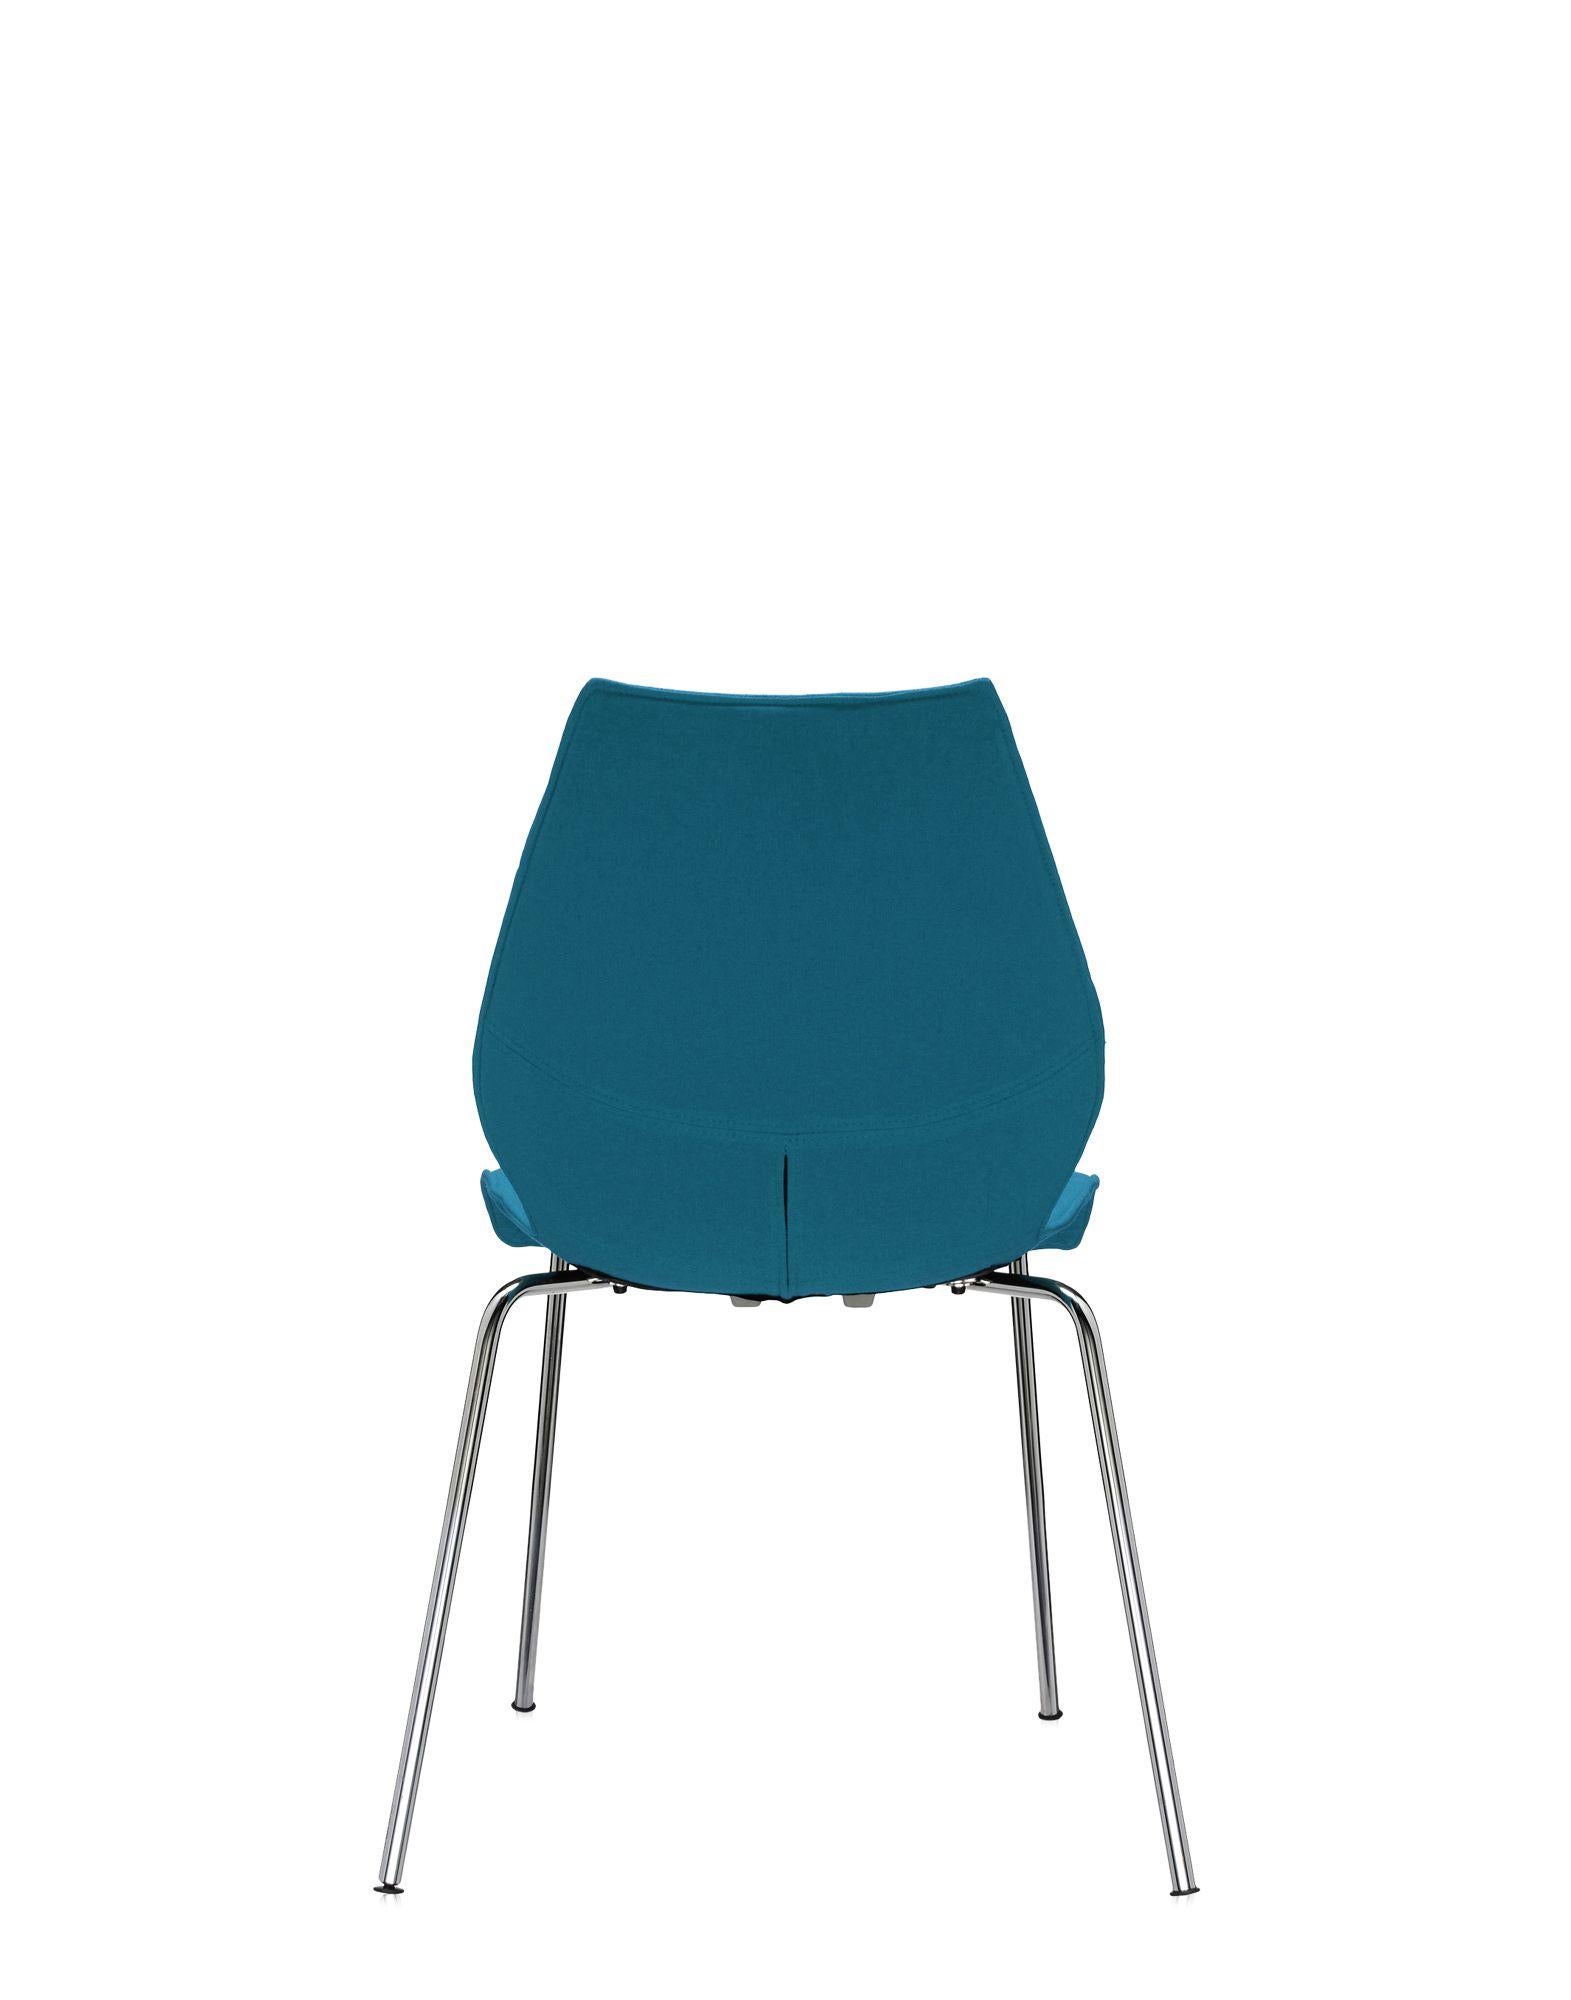 Modern Set of 2 Kartell Maui Soft Trevira Chair in Teal by Vico Magistretti